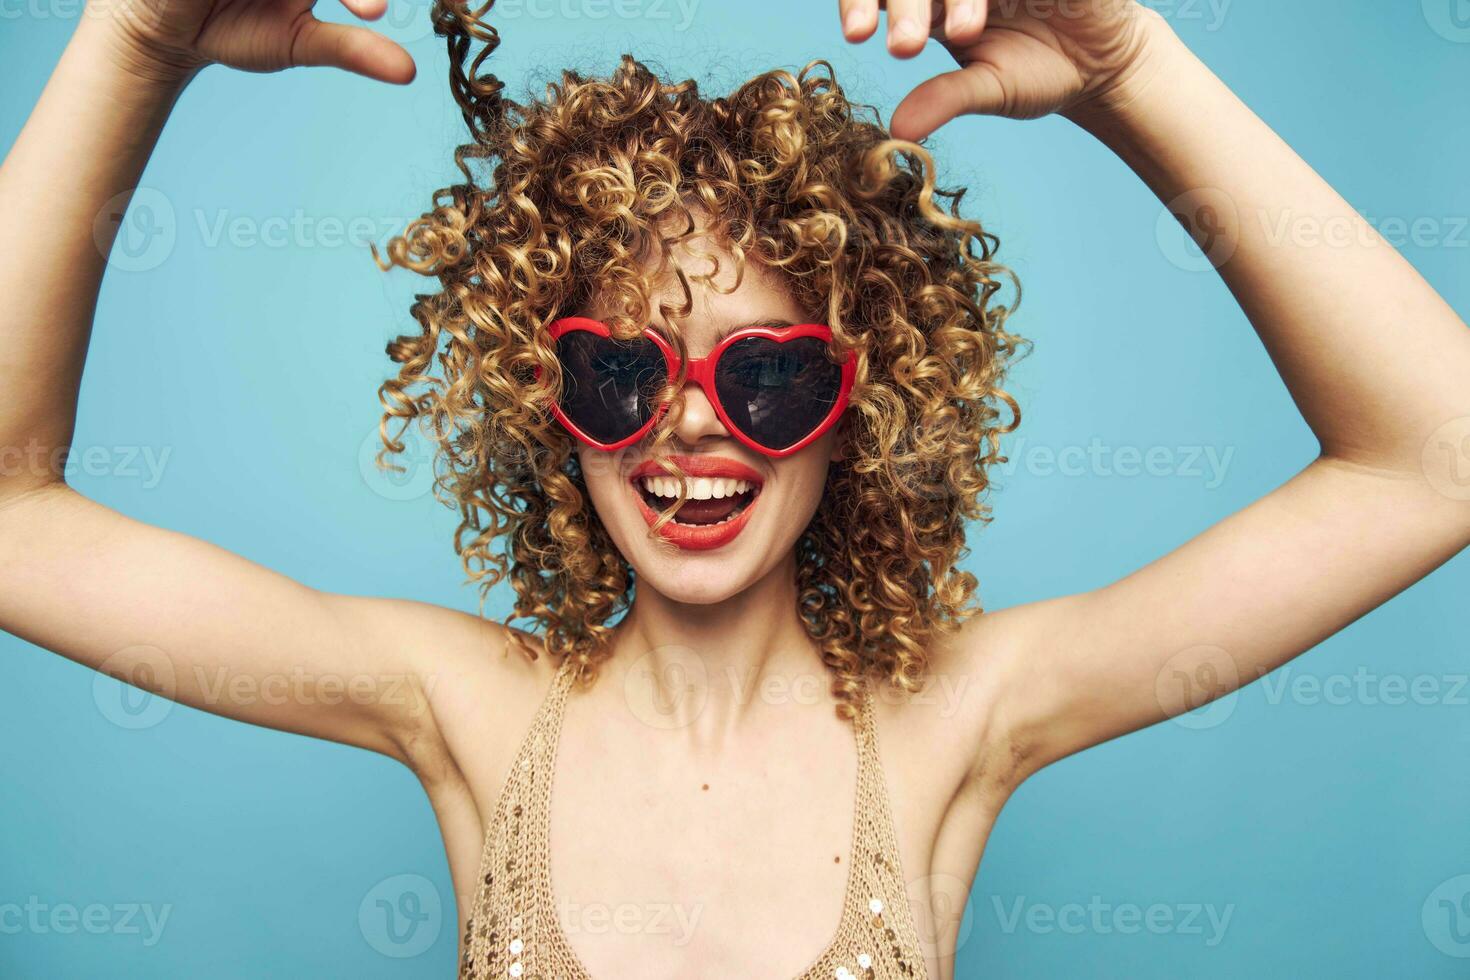 Emotional woman Curly hair smile decoration close-up red lips photo